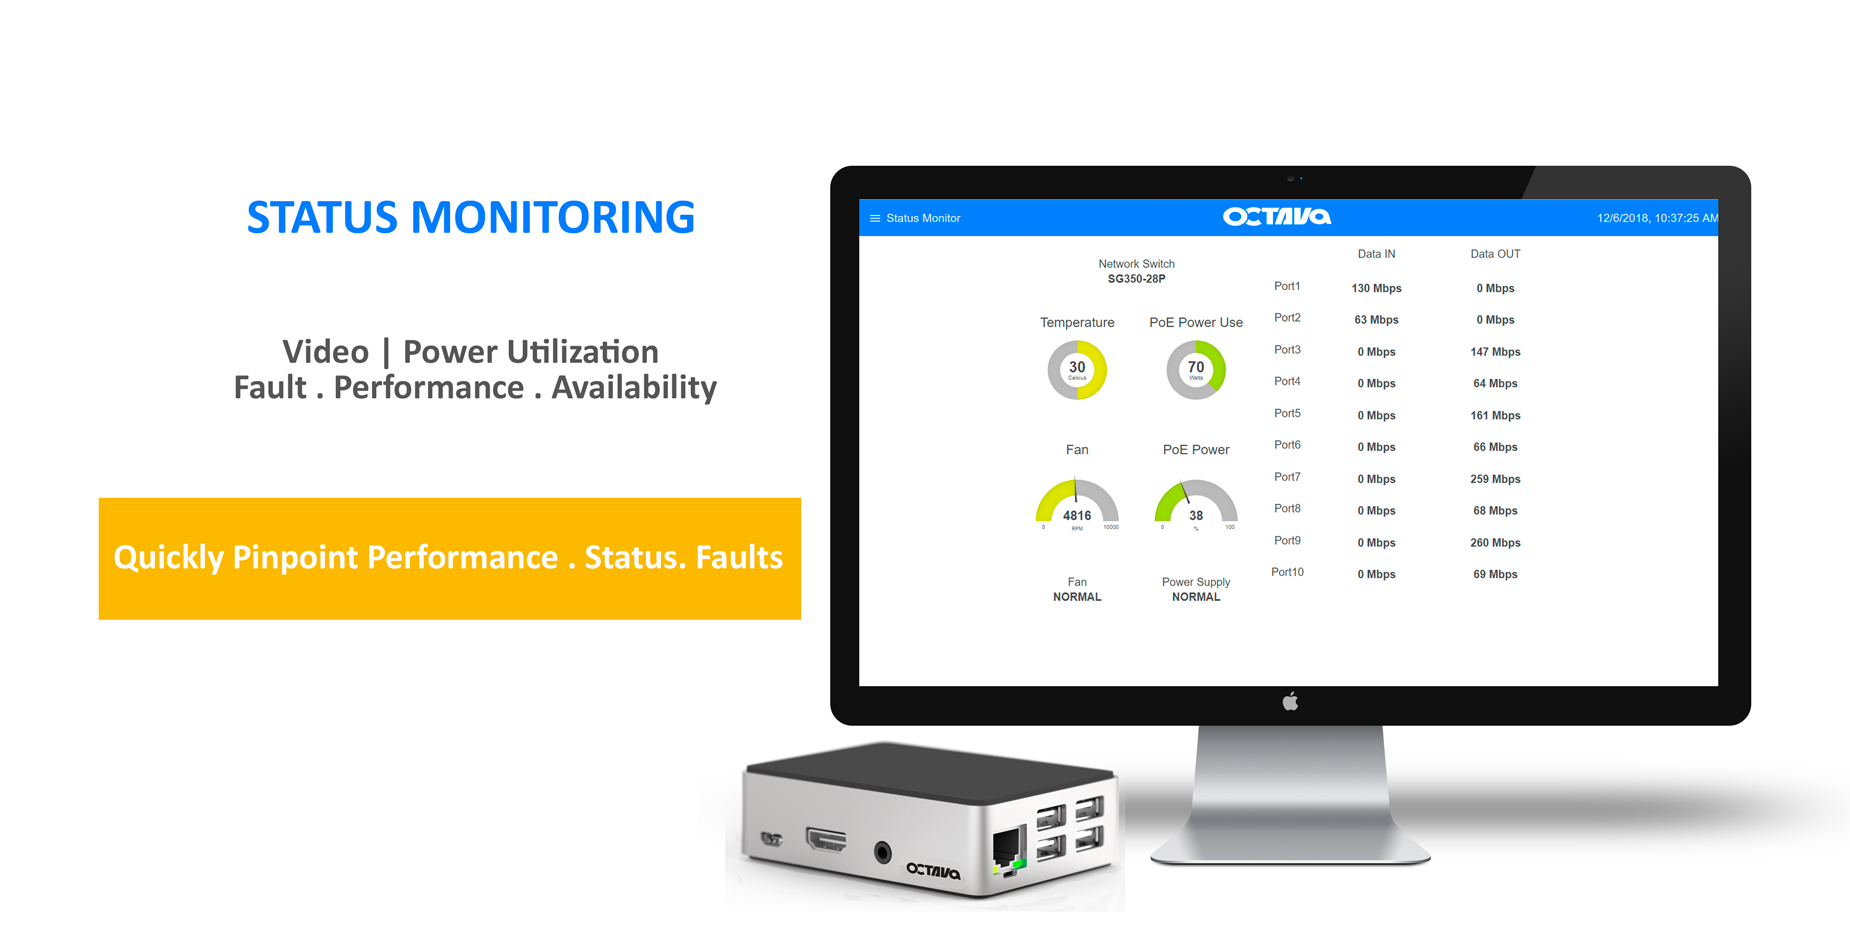 System Status Monitoring of Octava Video Over IP System